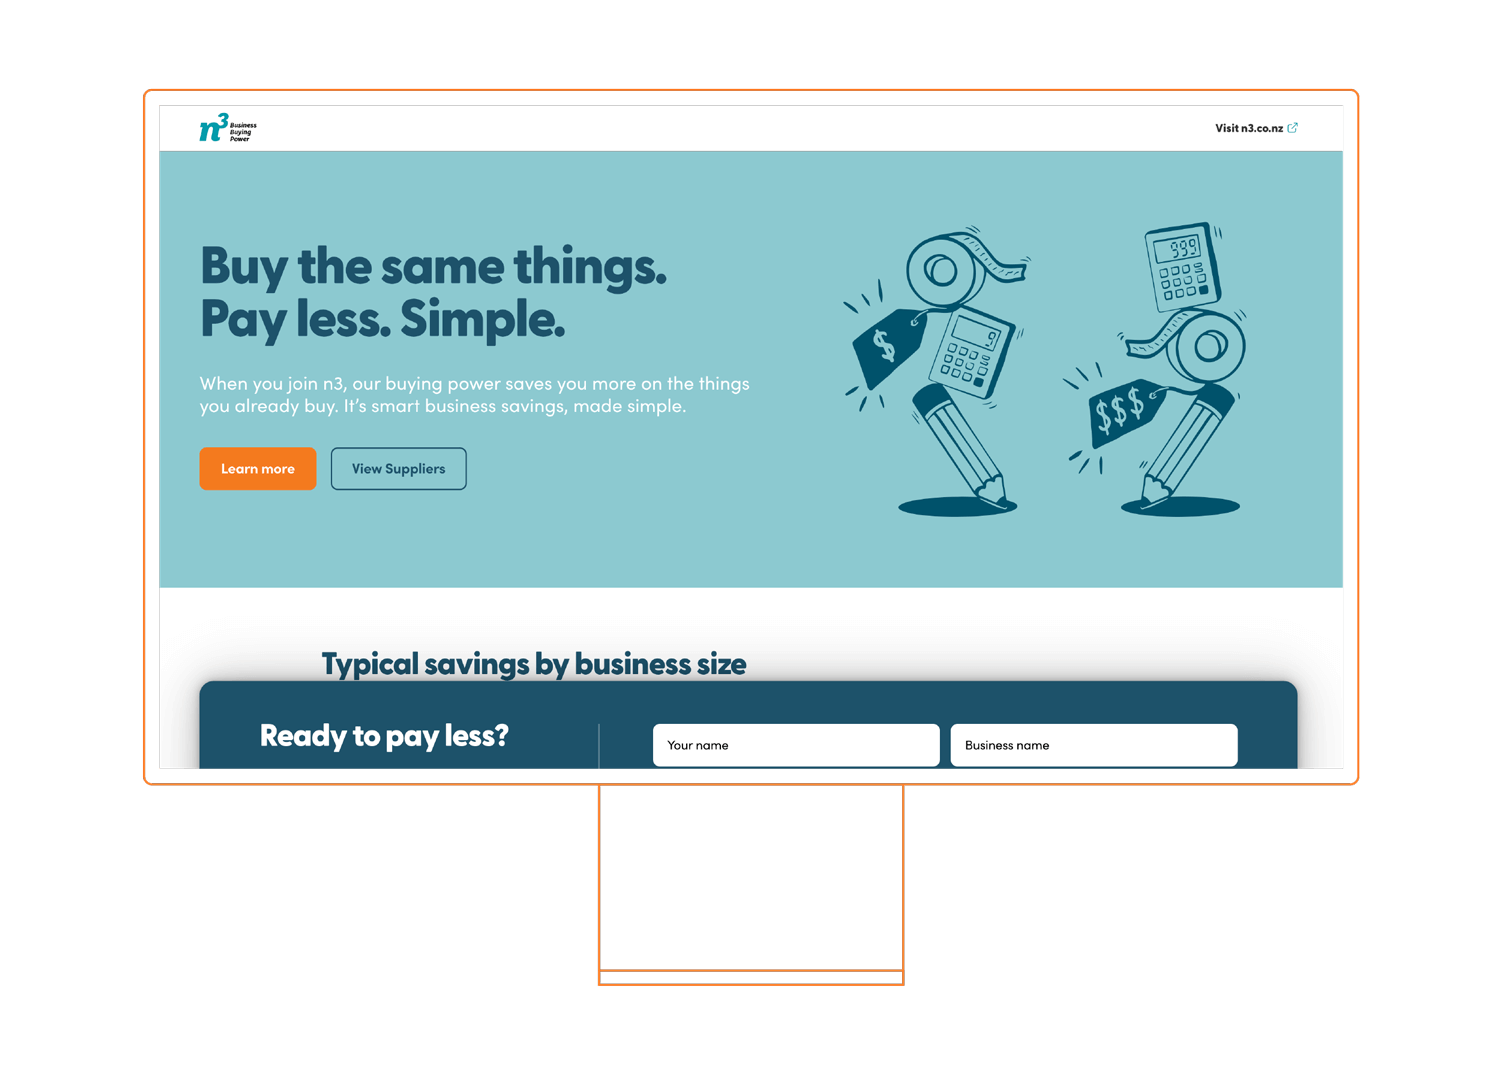 Illustration of a large computer screen showing a landing page. The landing page says "Buy the same things. Pay less. Simple.". The page has a call-to-action form.